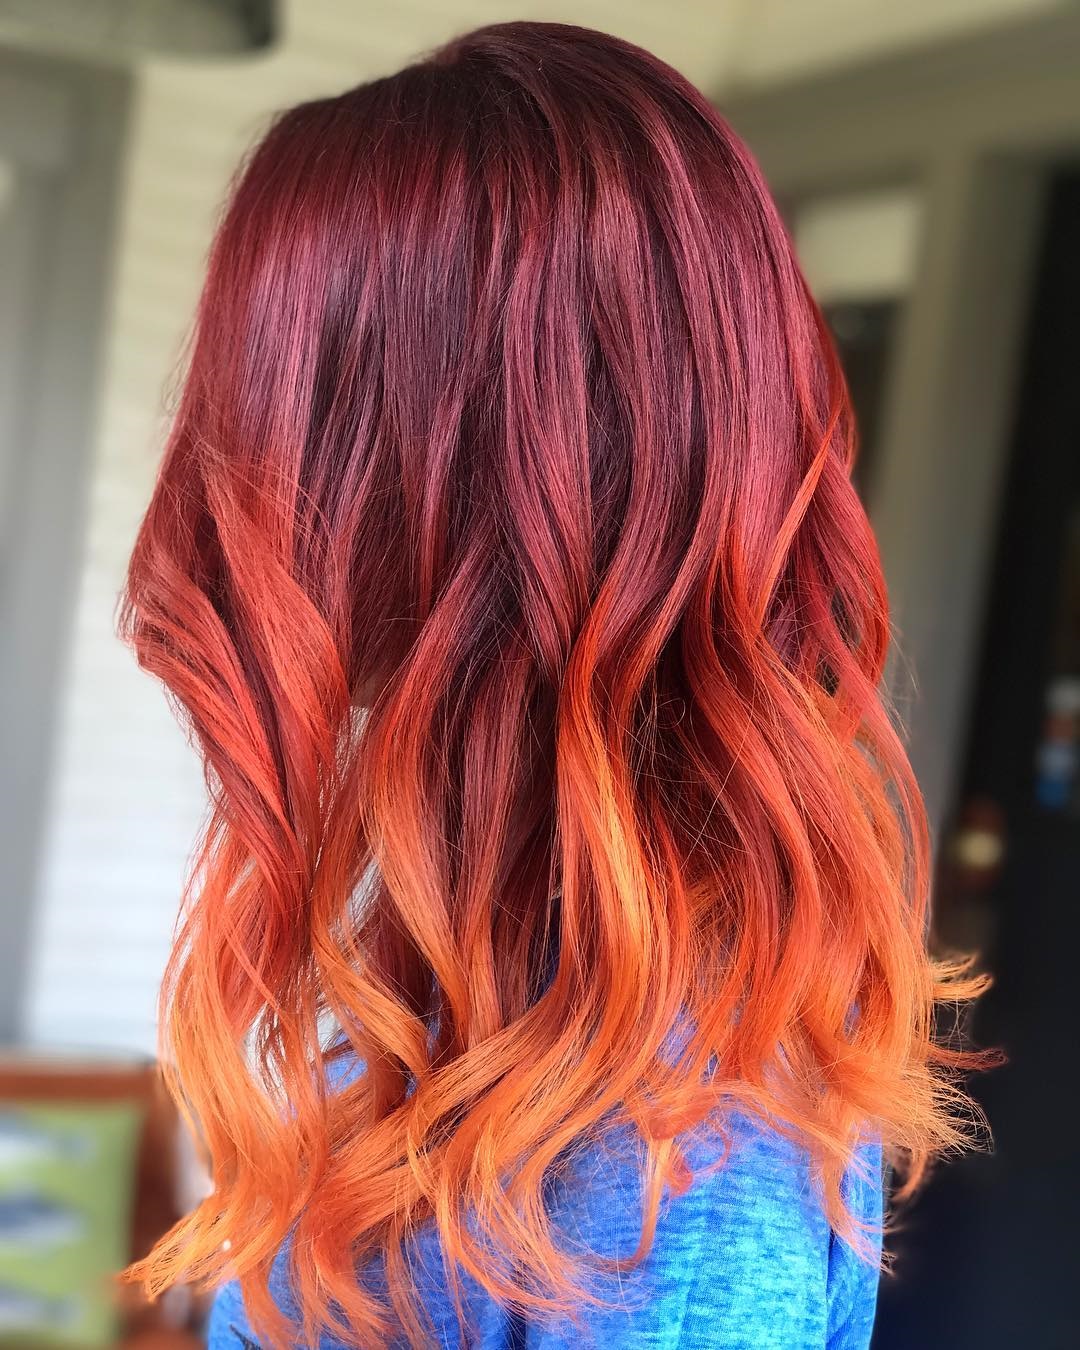 Radical Styling Ideas For Your Red Ombre Hair